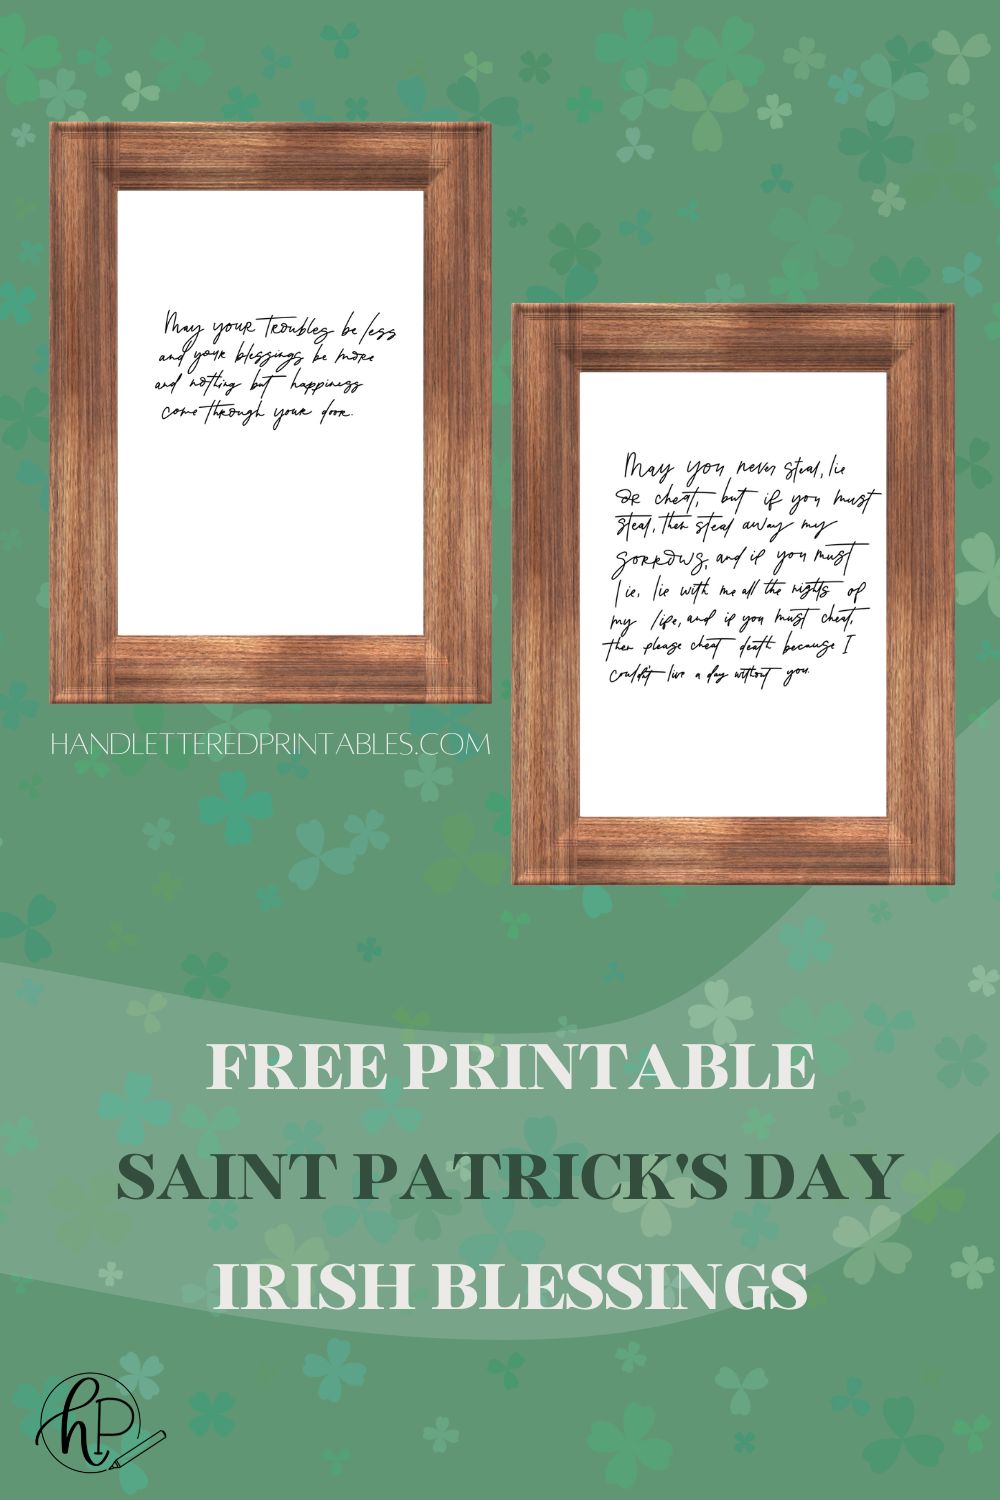 Two free printable saint patrick's day irish blessings- black lettering on white background in wood frame. 